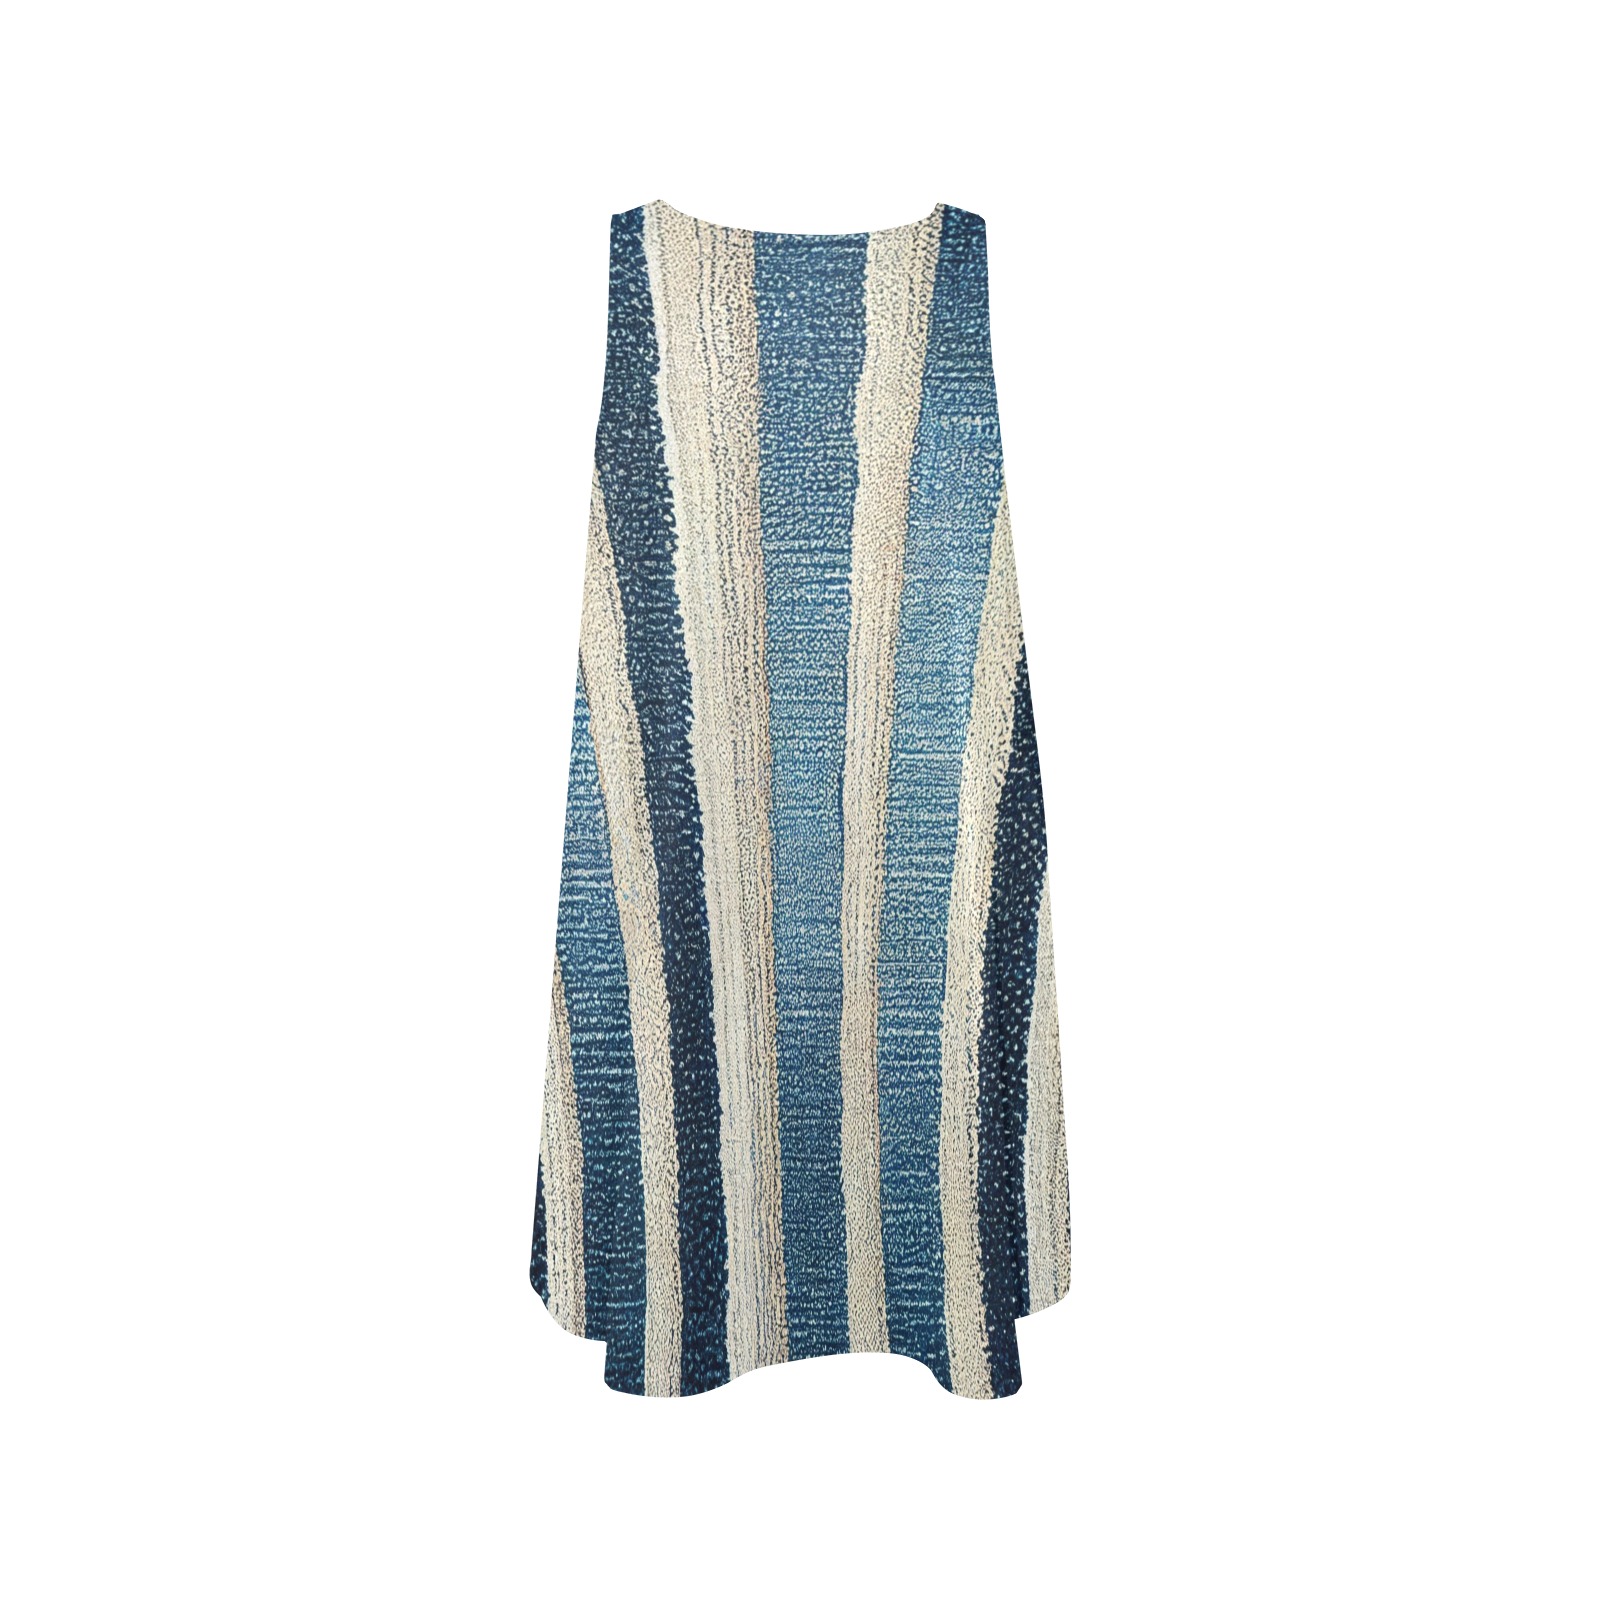 vertical striped pattern, blue and white Sleeveless A-Line Pocket Dress (Model D57)